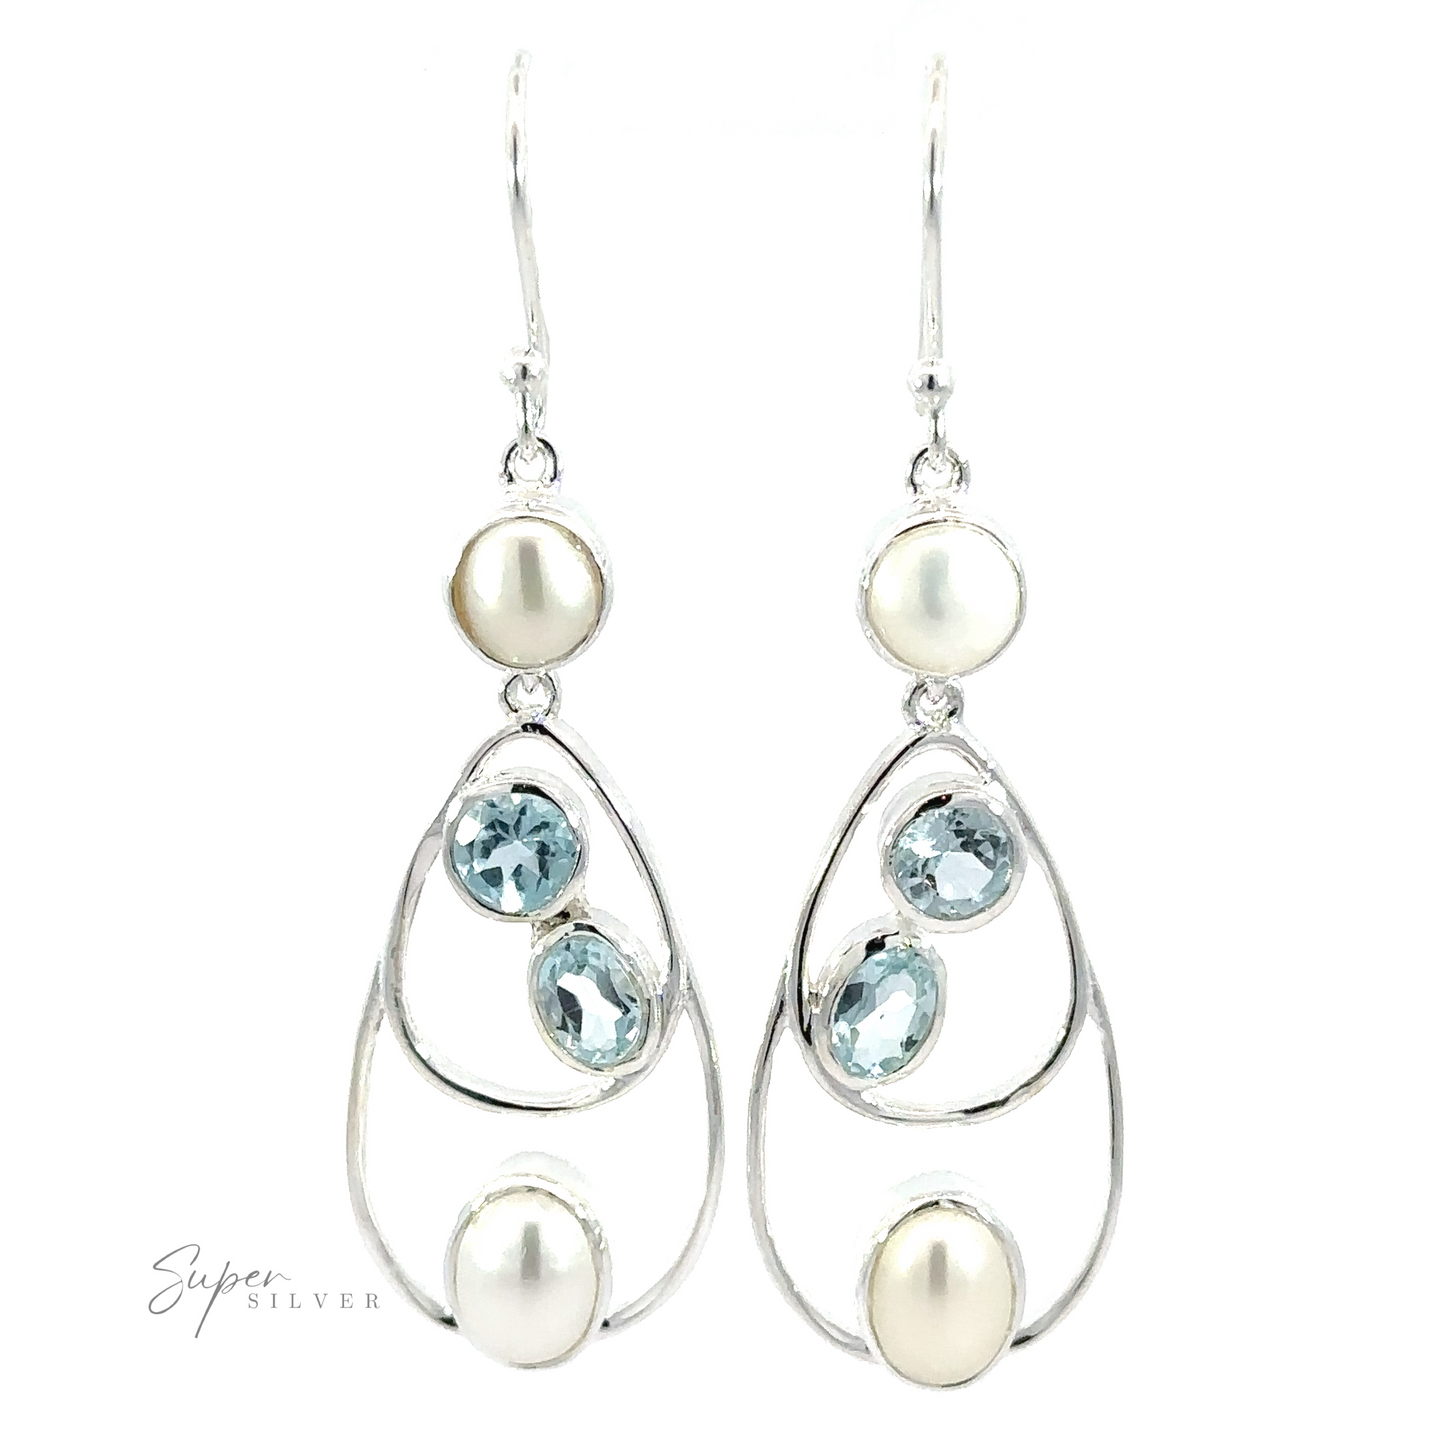 A pair of Stunning Teardrop Pearl and Blue Topaz Earrings featuring round and oval blue gemstones and pearls, with a hook fastening.